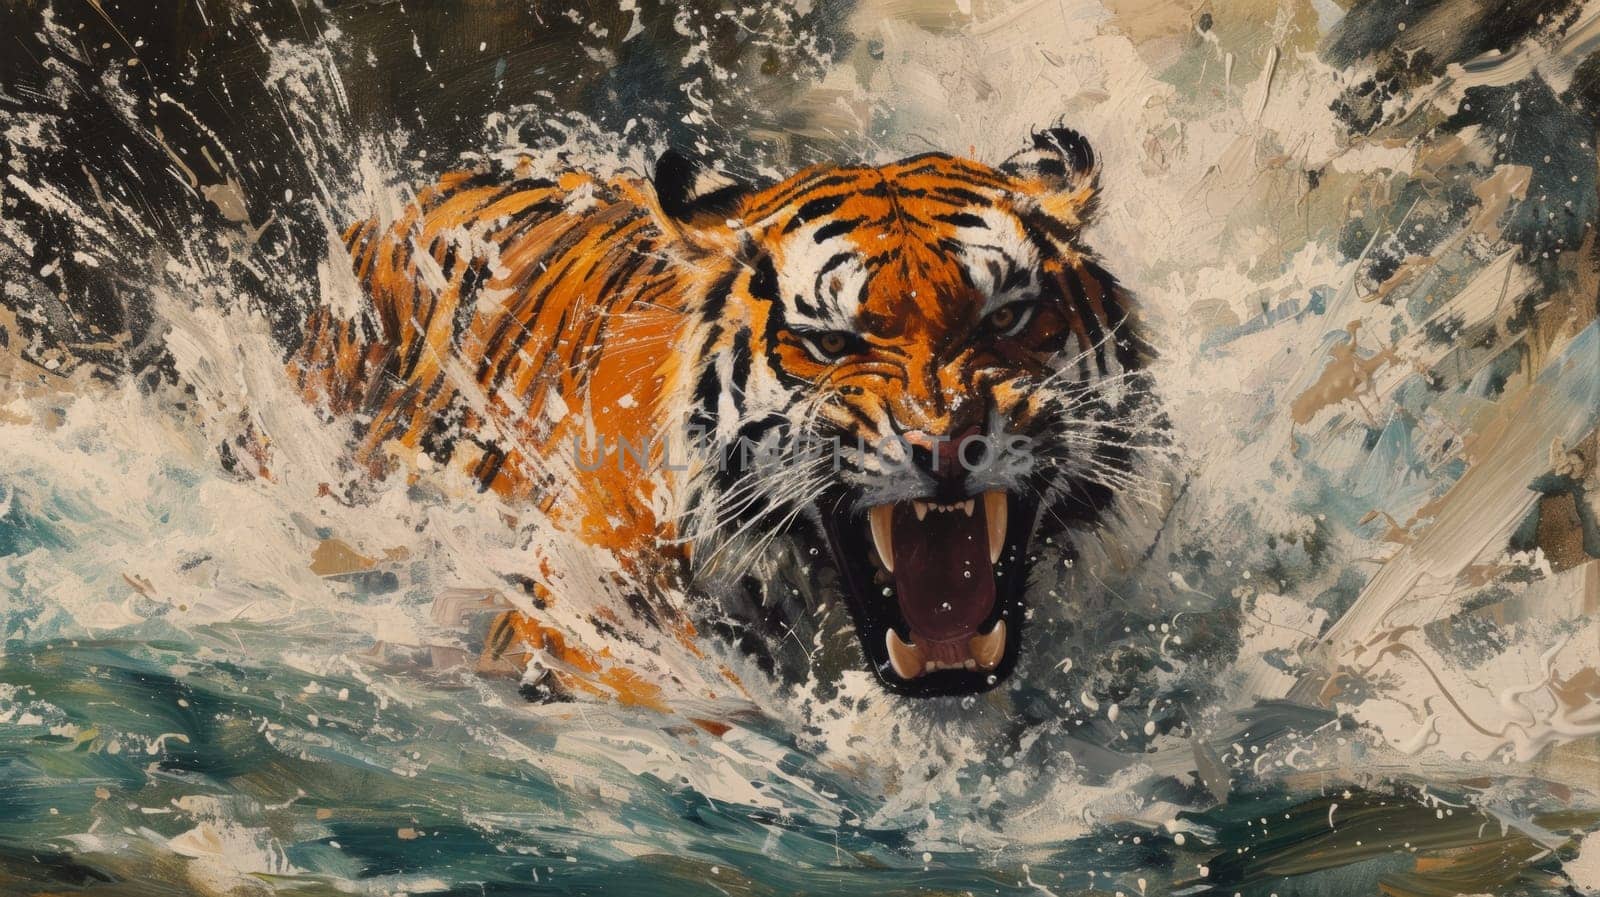 A painting of a tiger roaring in the water with its mouth open